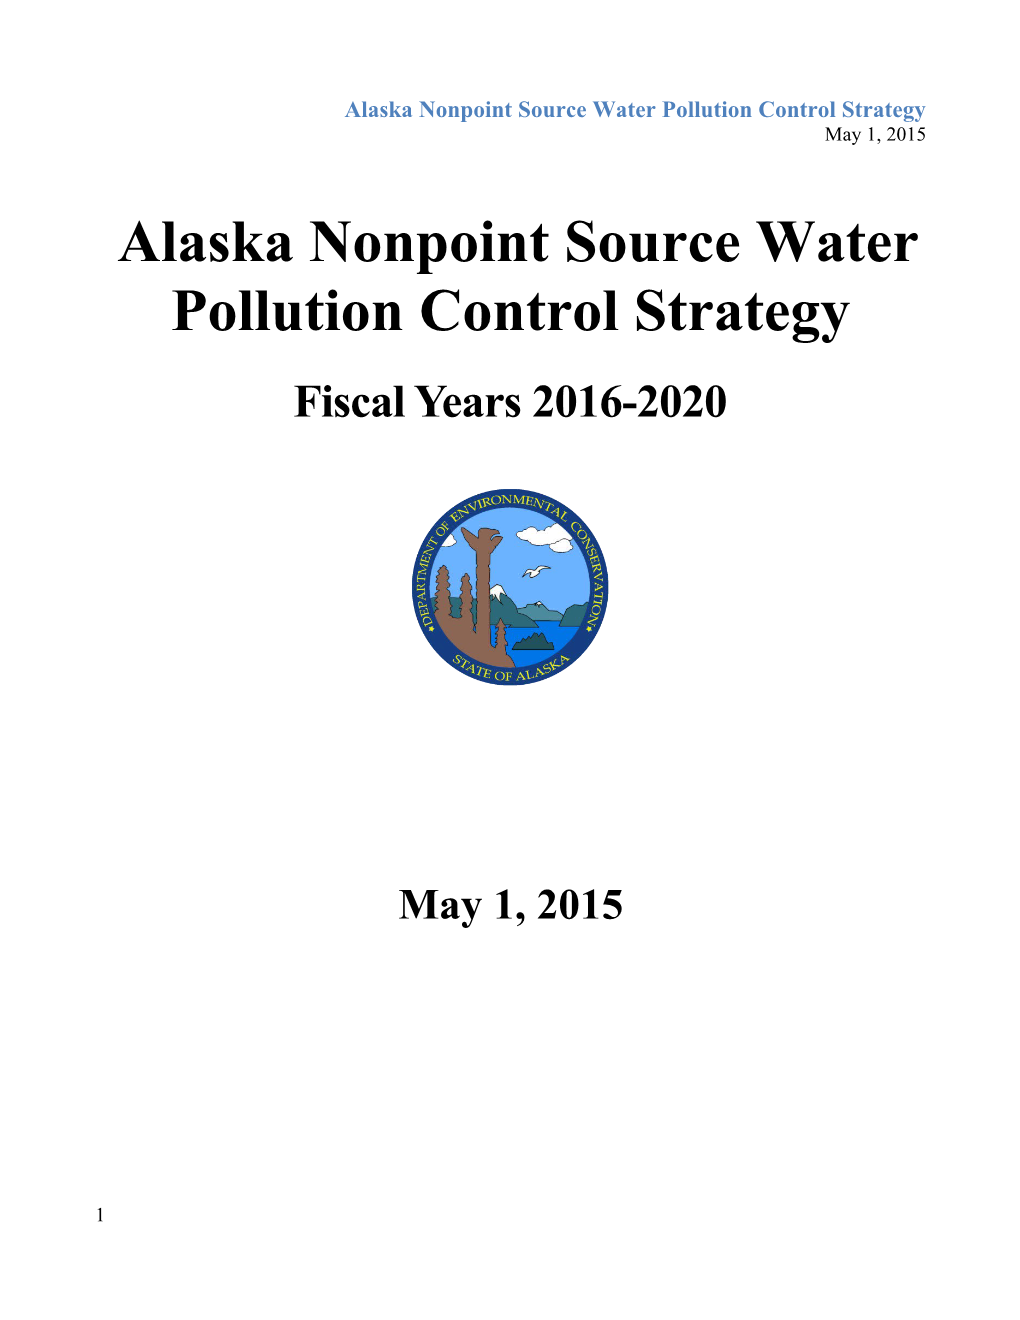 Alaska S Nonpoint Source Water Pollution Control Strategy